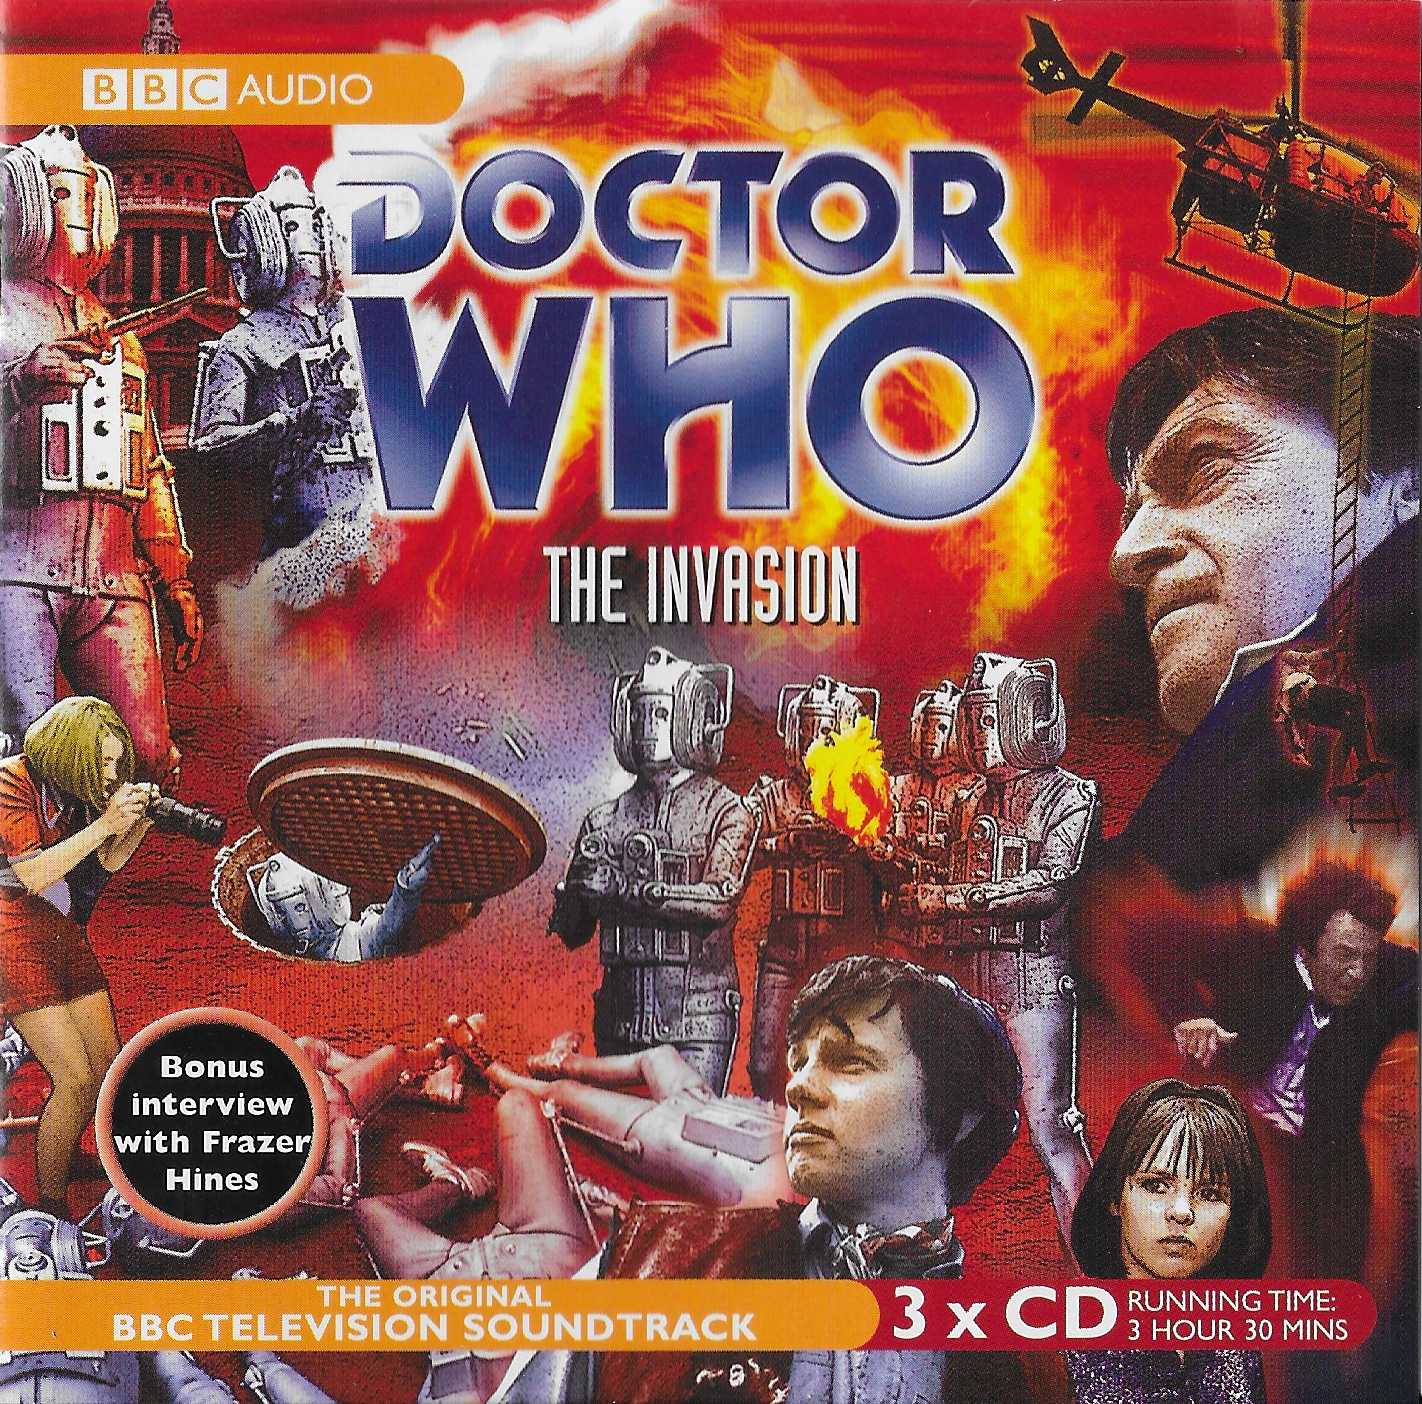 Picture of ISBN 0-563-52327-1 Doctor Who - The invasion by artist Derrick Sherwin / Kit Pedler from the BBC cds - Records and Tapes library